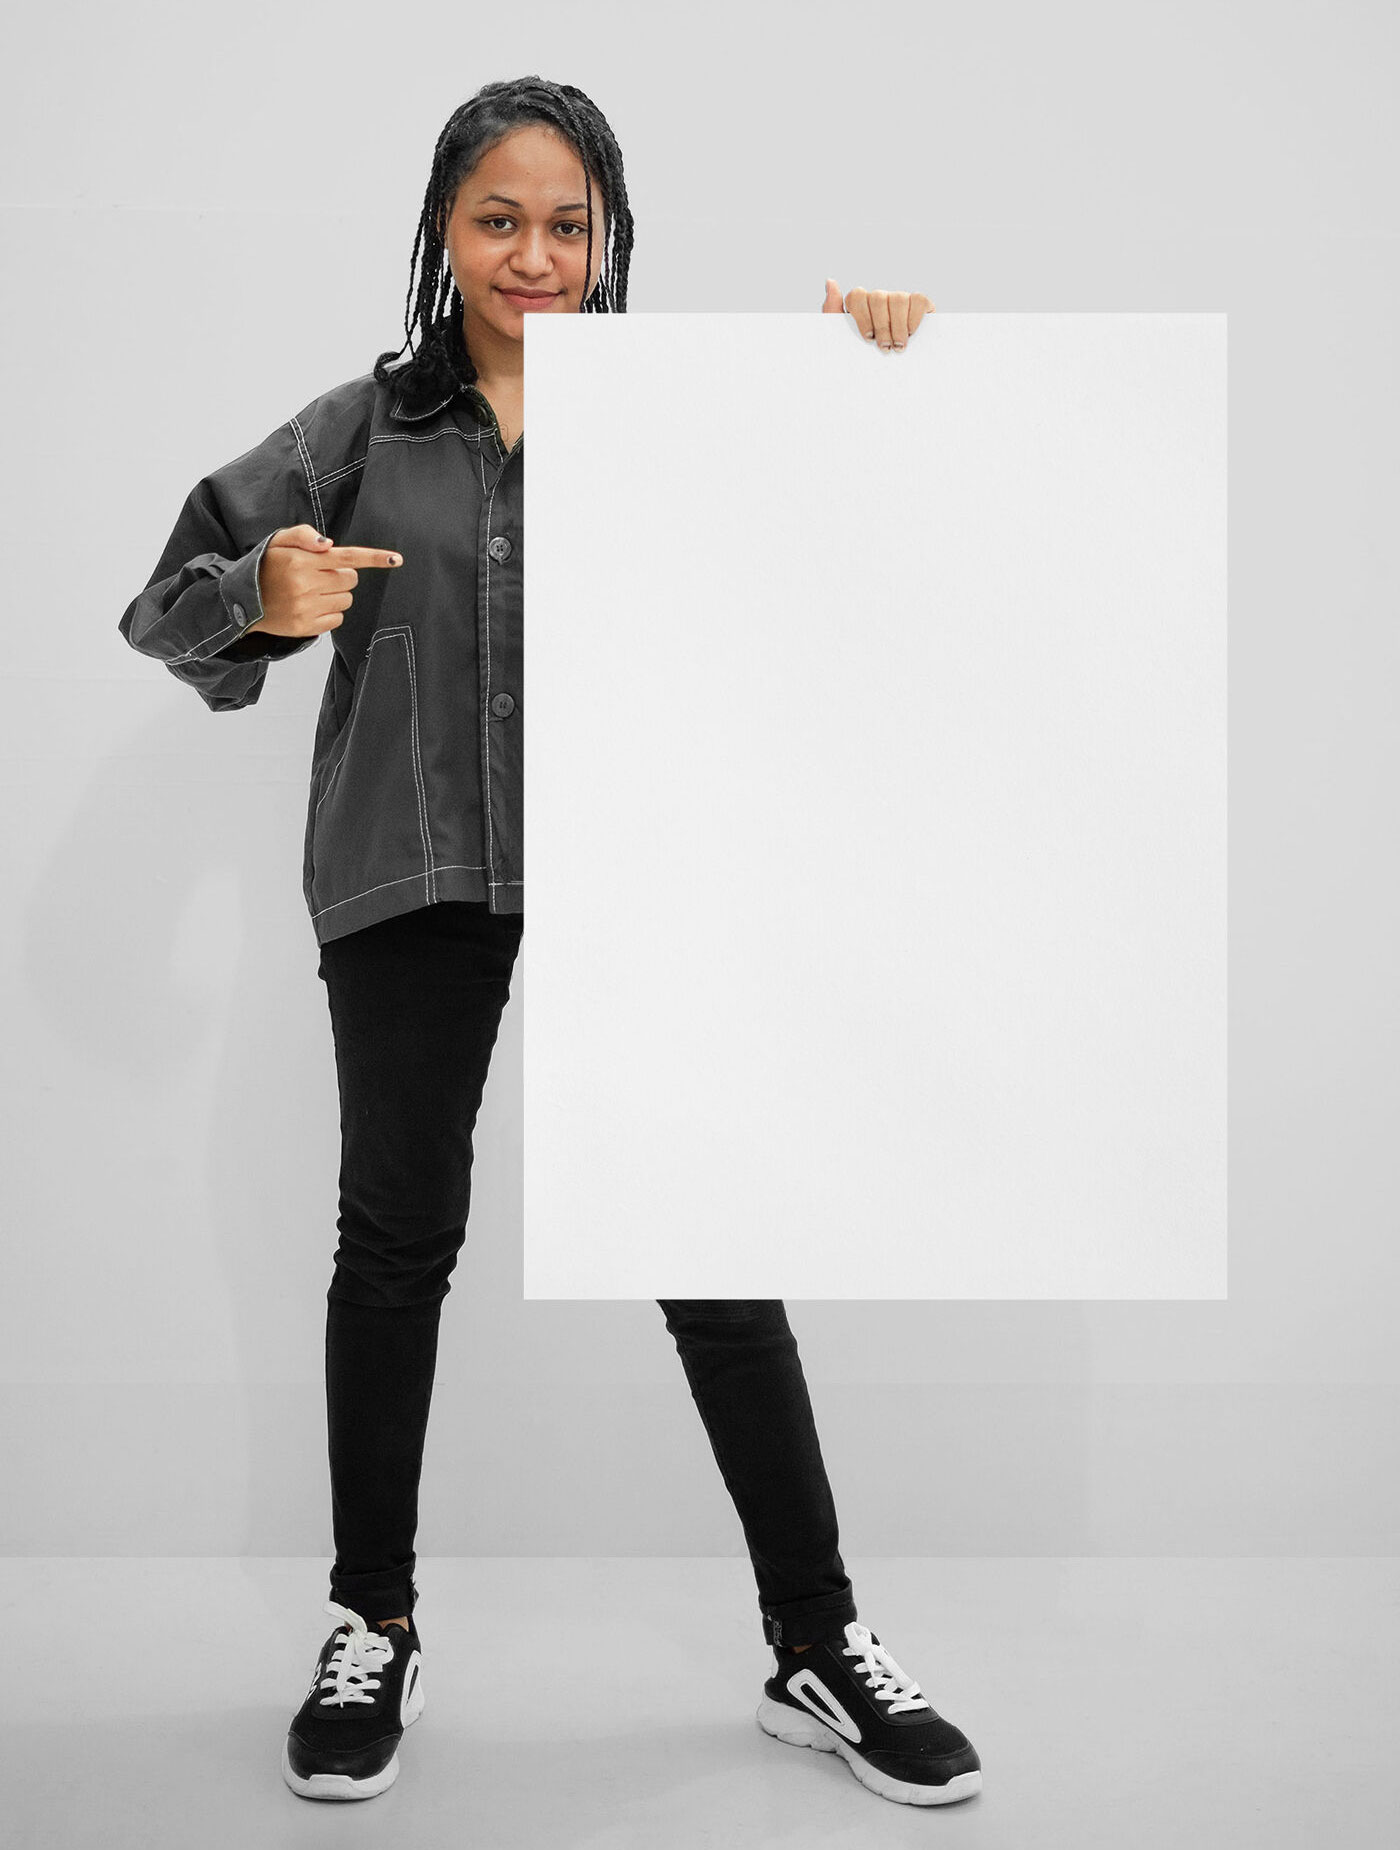 A Front View of a Women Holding Poster Mockup FREE PSD